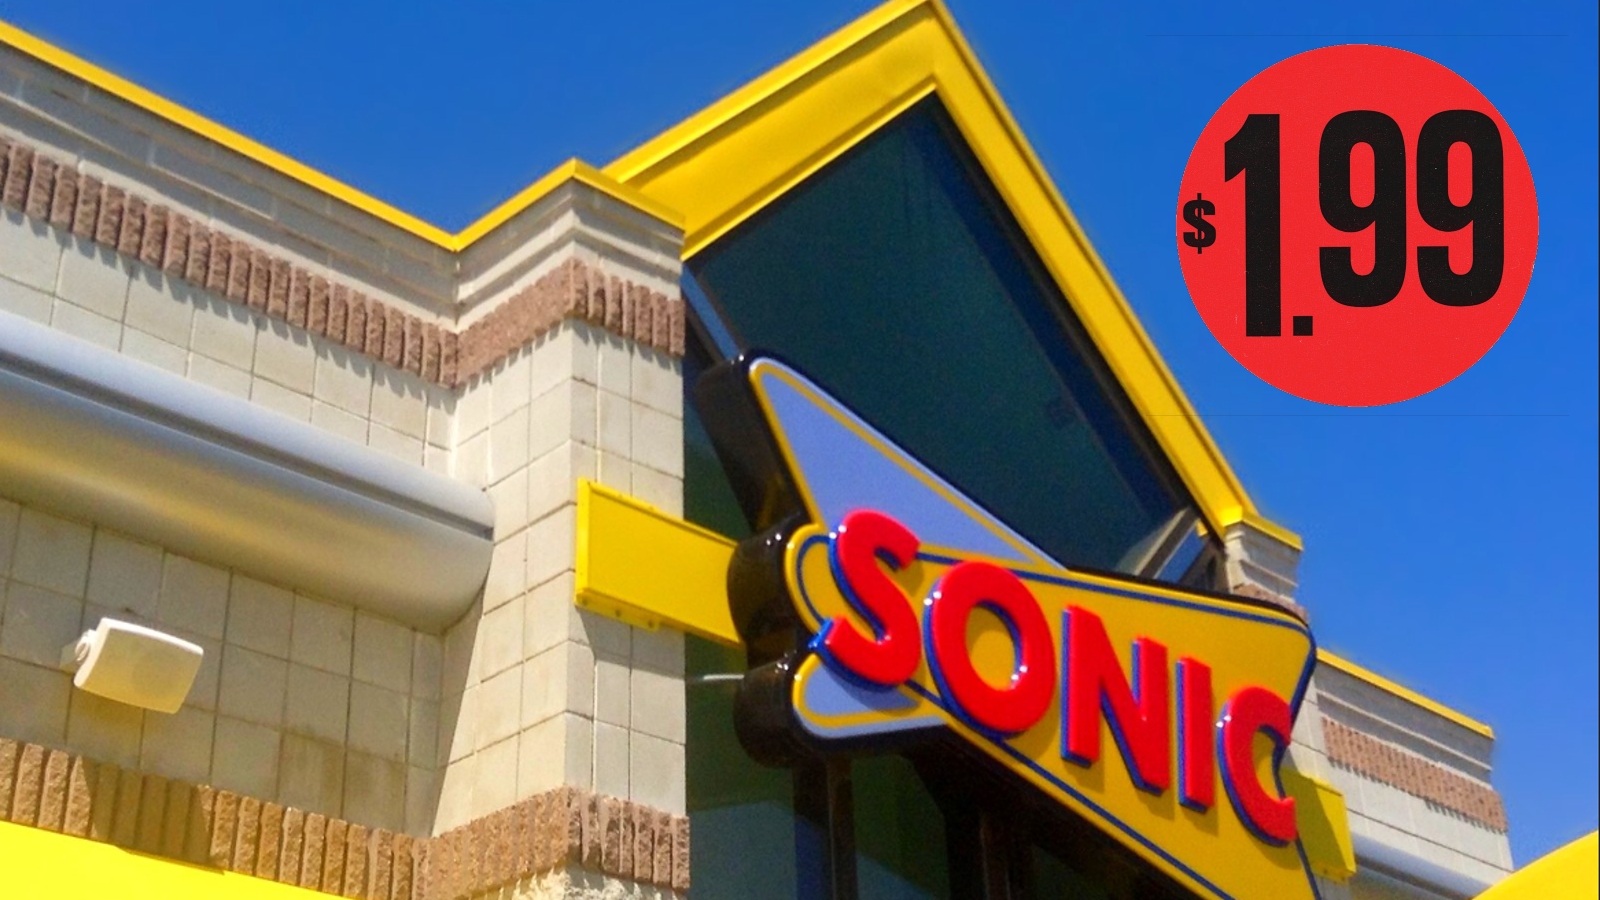 Sonic finally releases a .99 menu full of added value